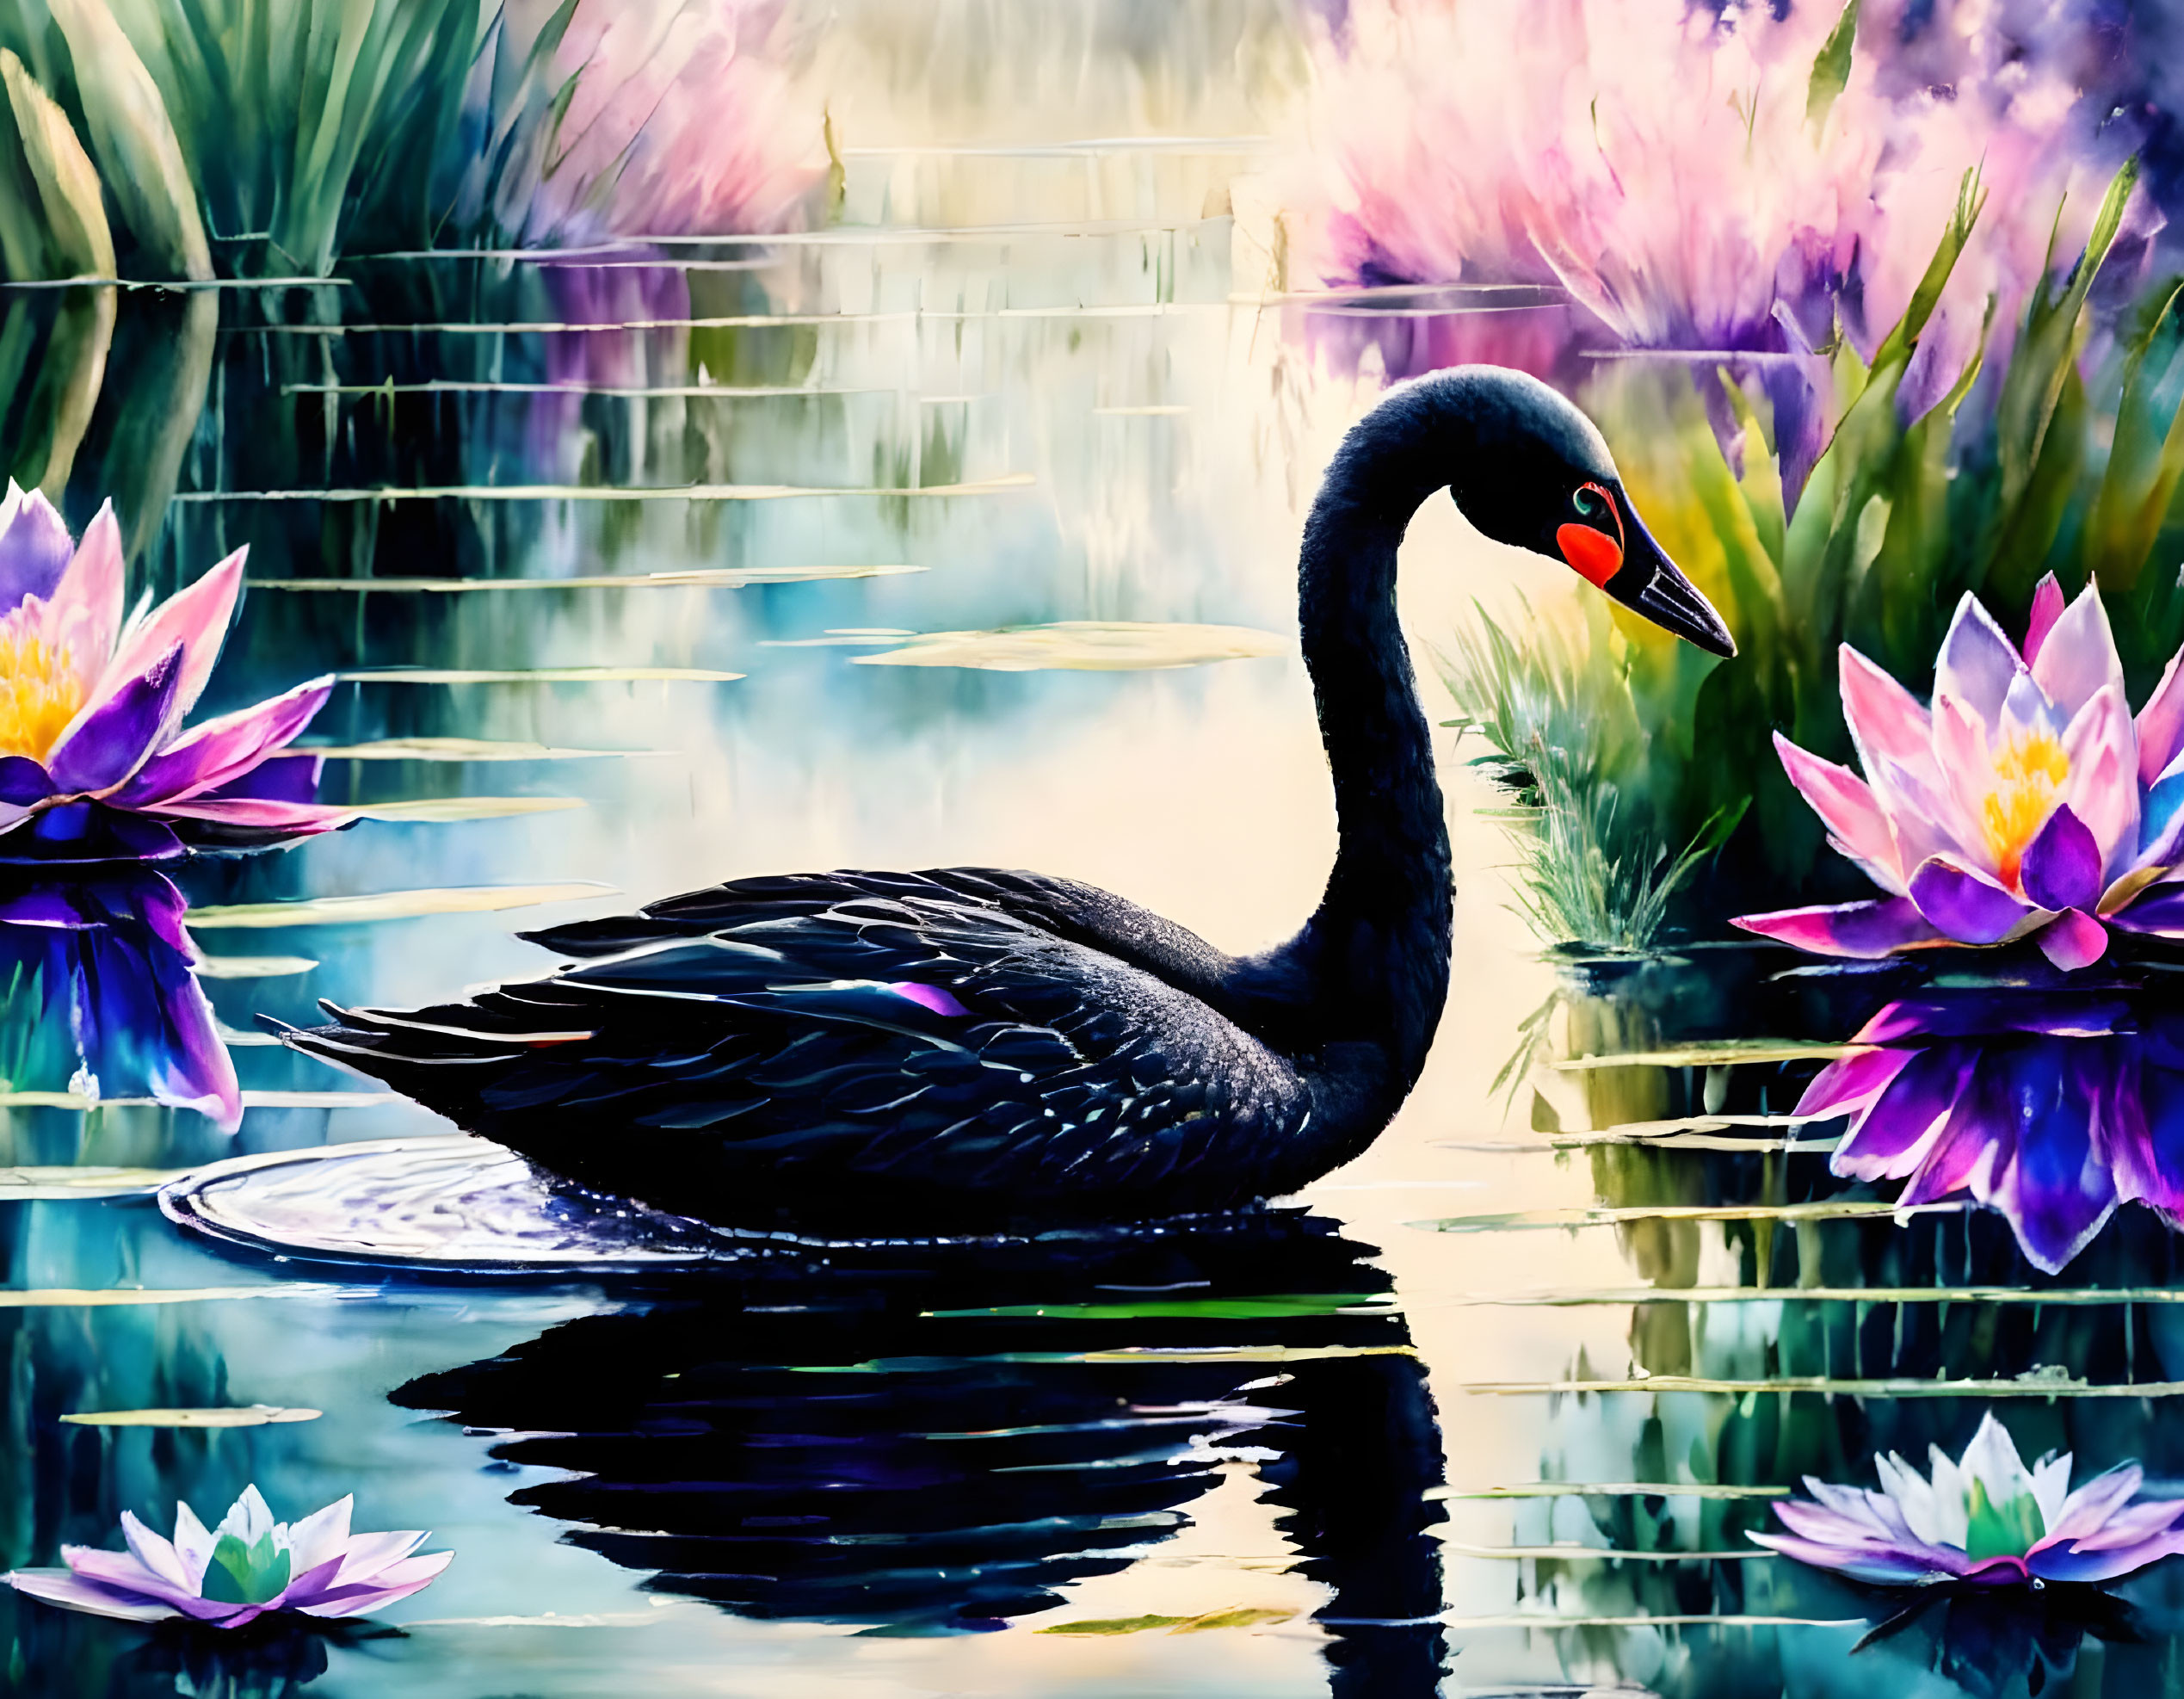 Black swan and some water lilies